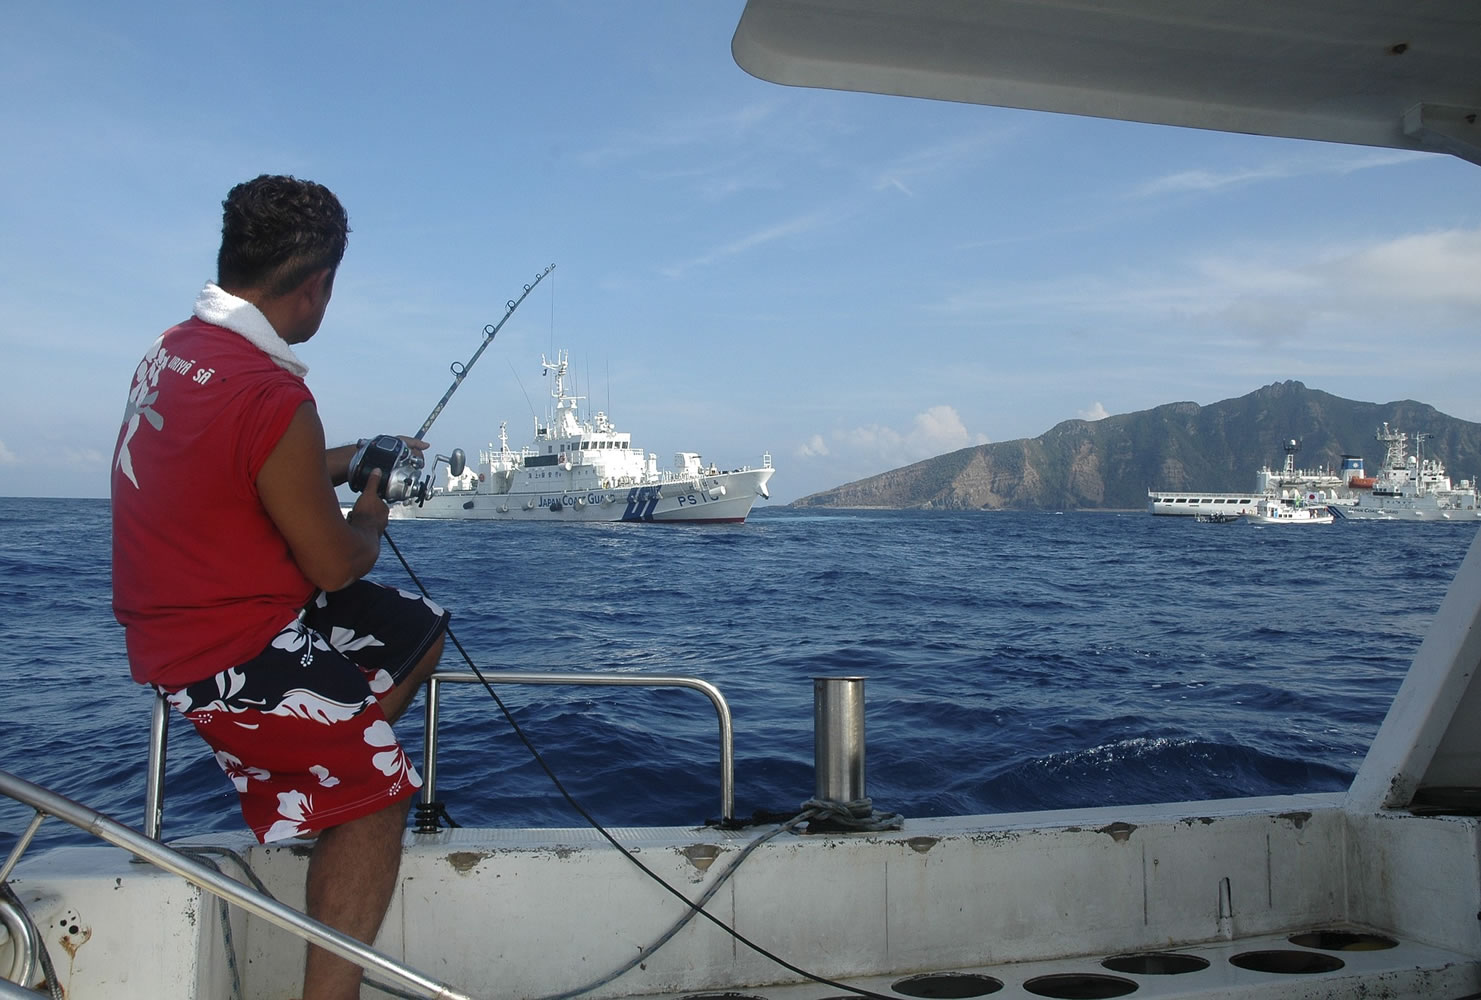 Associated Press files
A Japanese activist fishes from a boat in August 2013 near a group of disputed islands called the Senkaku by Japan and Diaoyu by China. Japanese Coast Guard vessels are seen in the background.